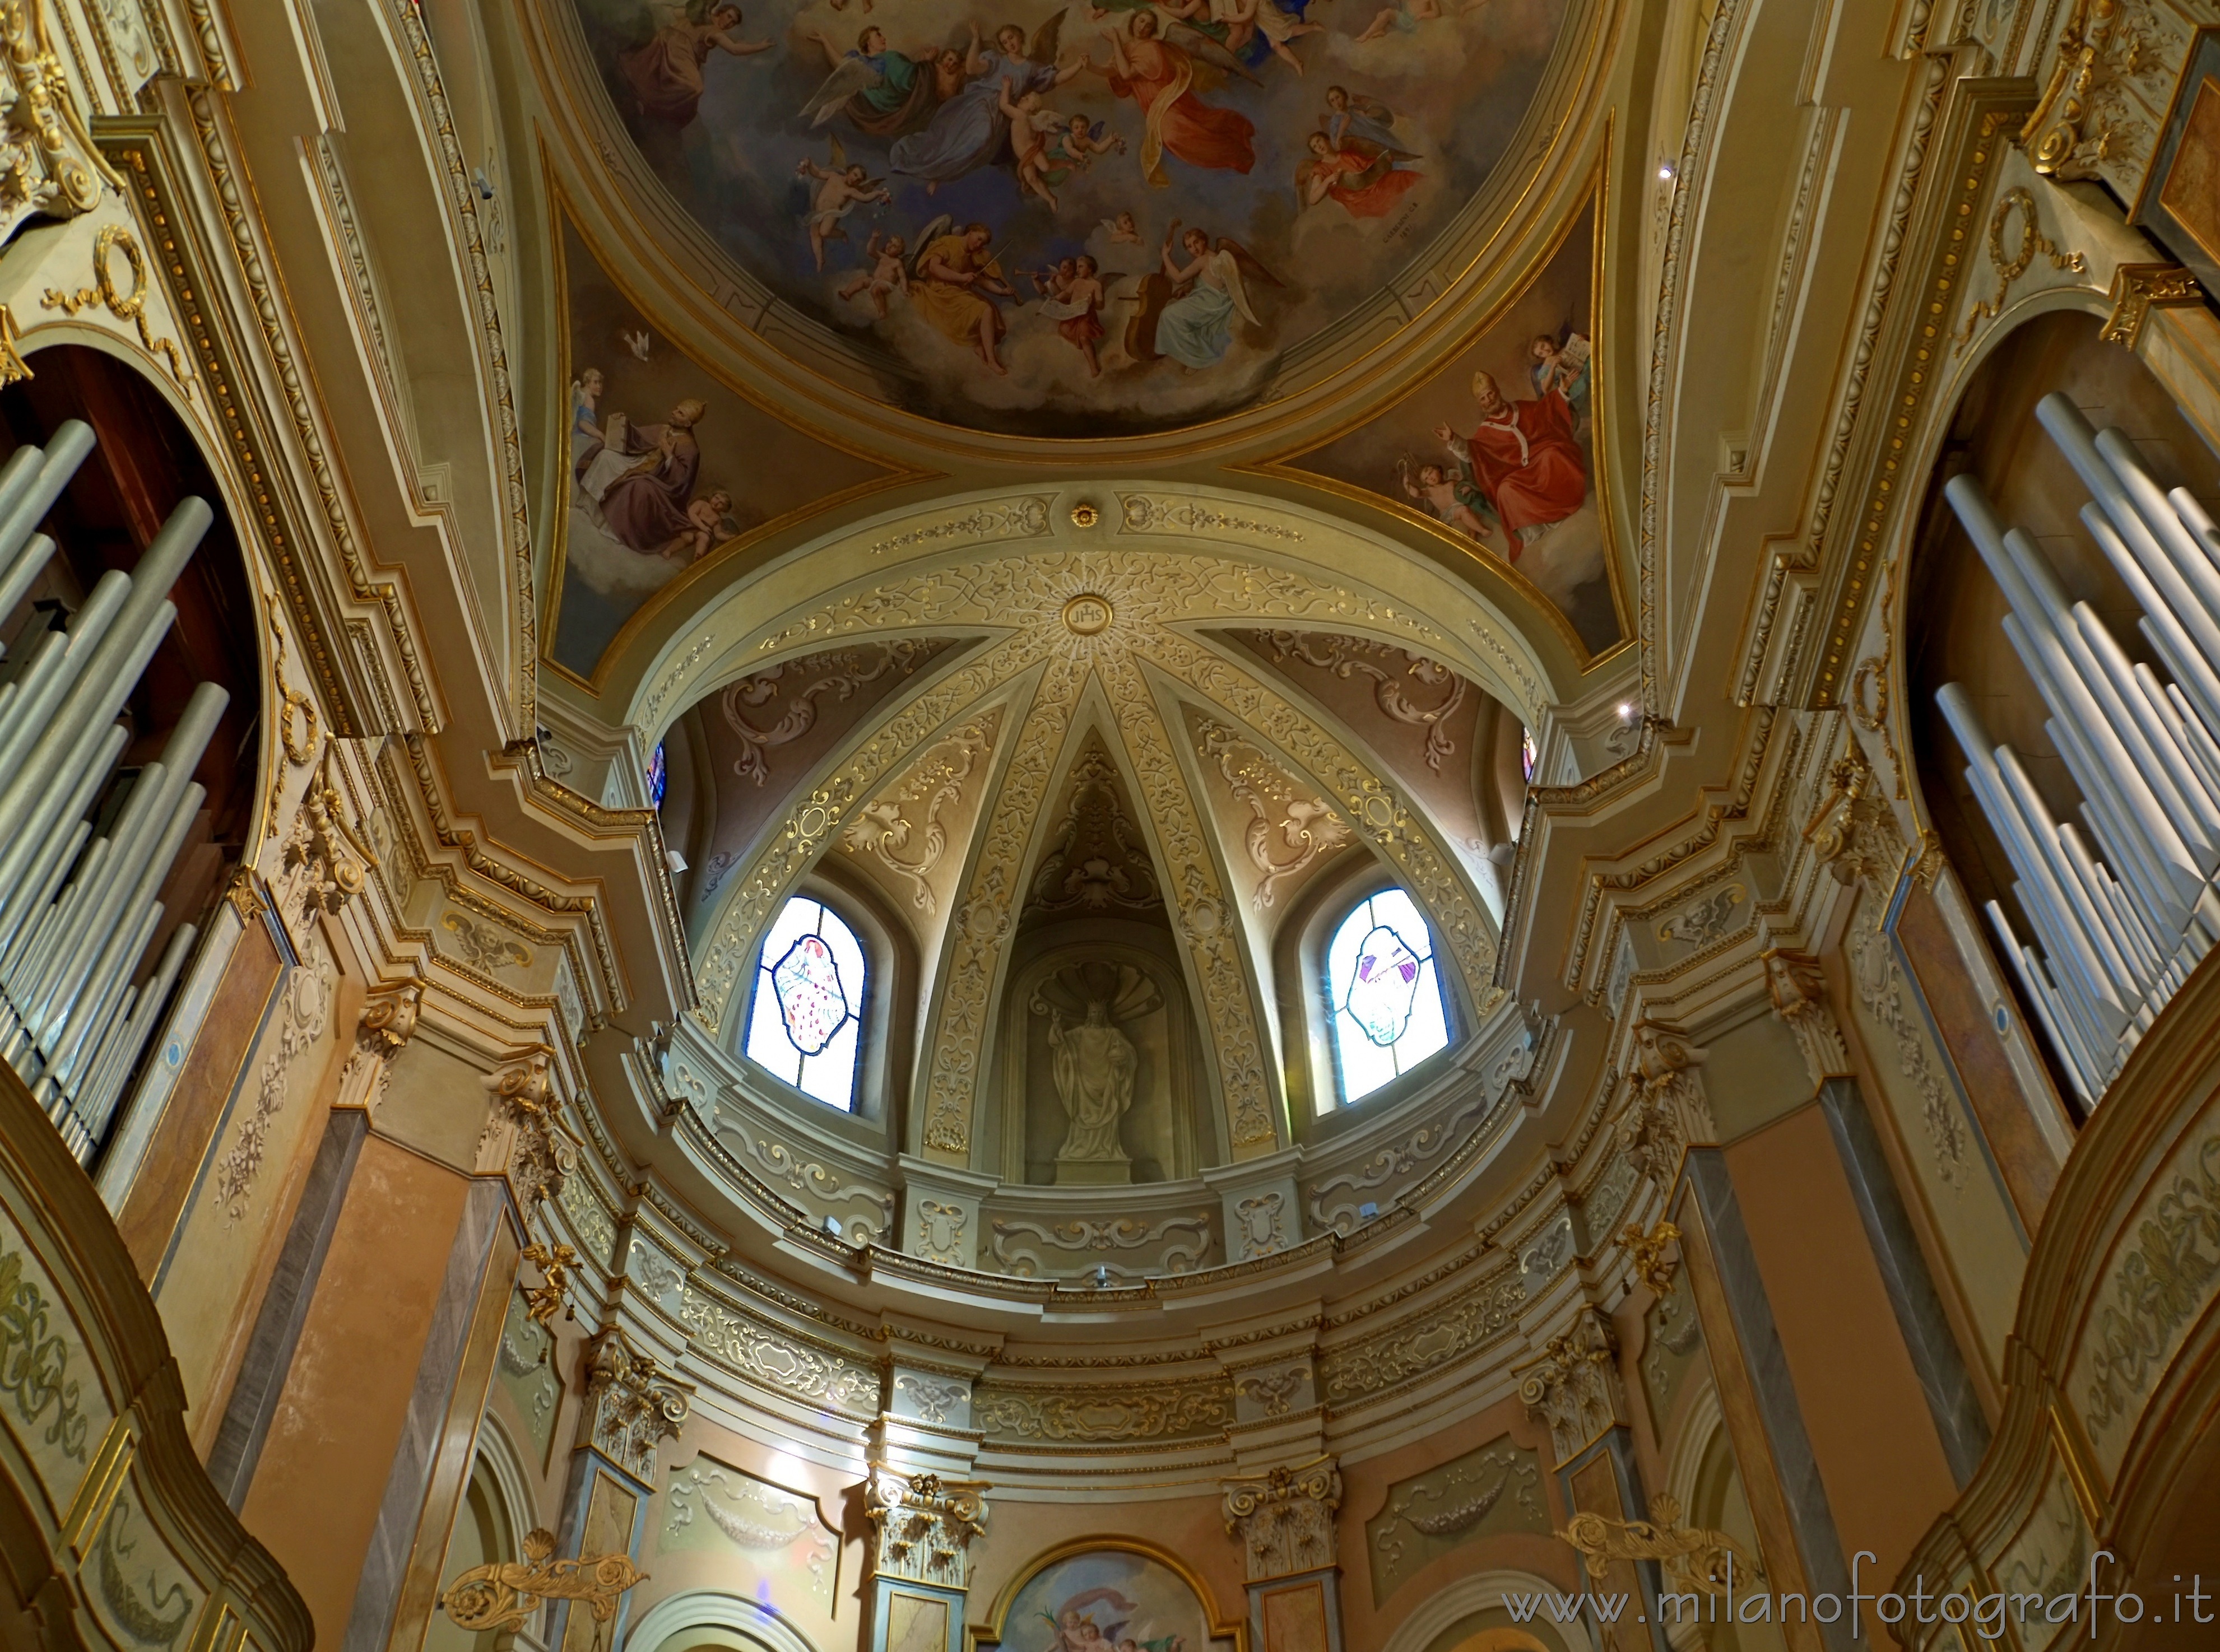 Cilavegna (Pavia, Italy): Aps of the Church of the Saints Peter and Paul - Cilavegna (Pavia, Italy)